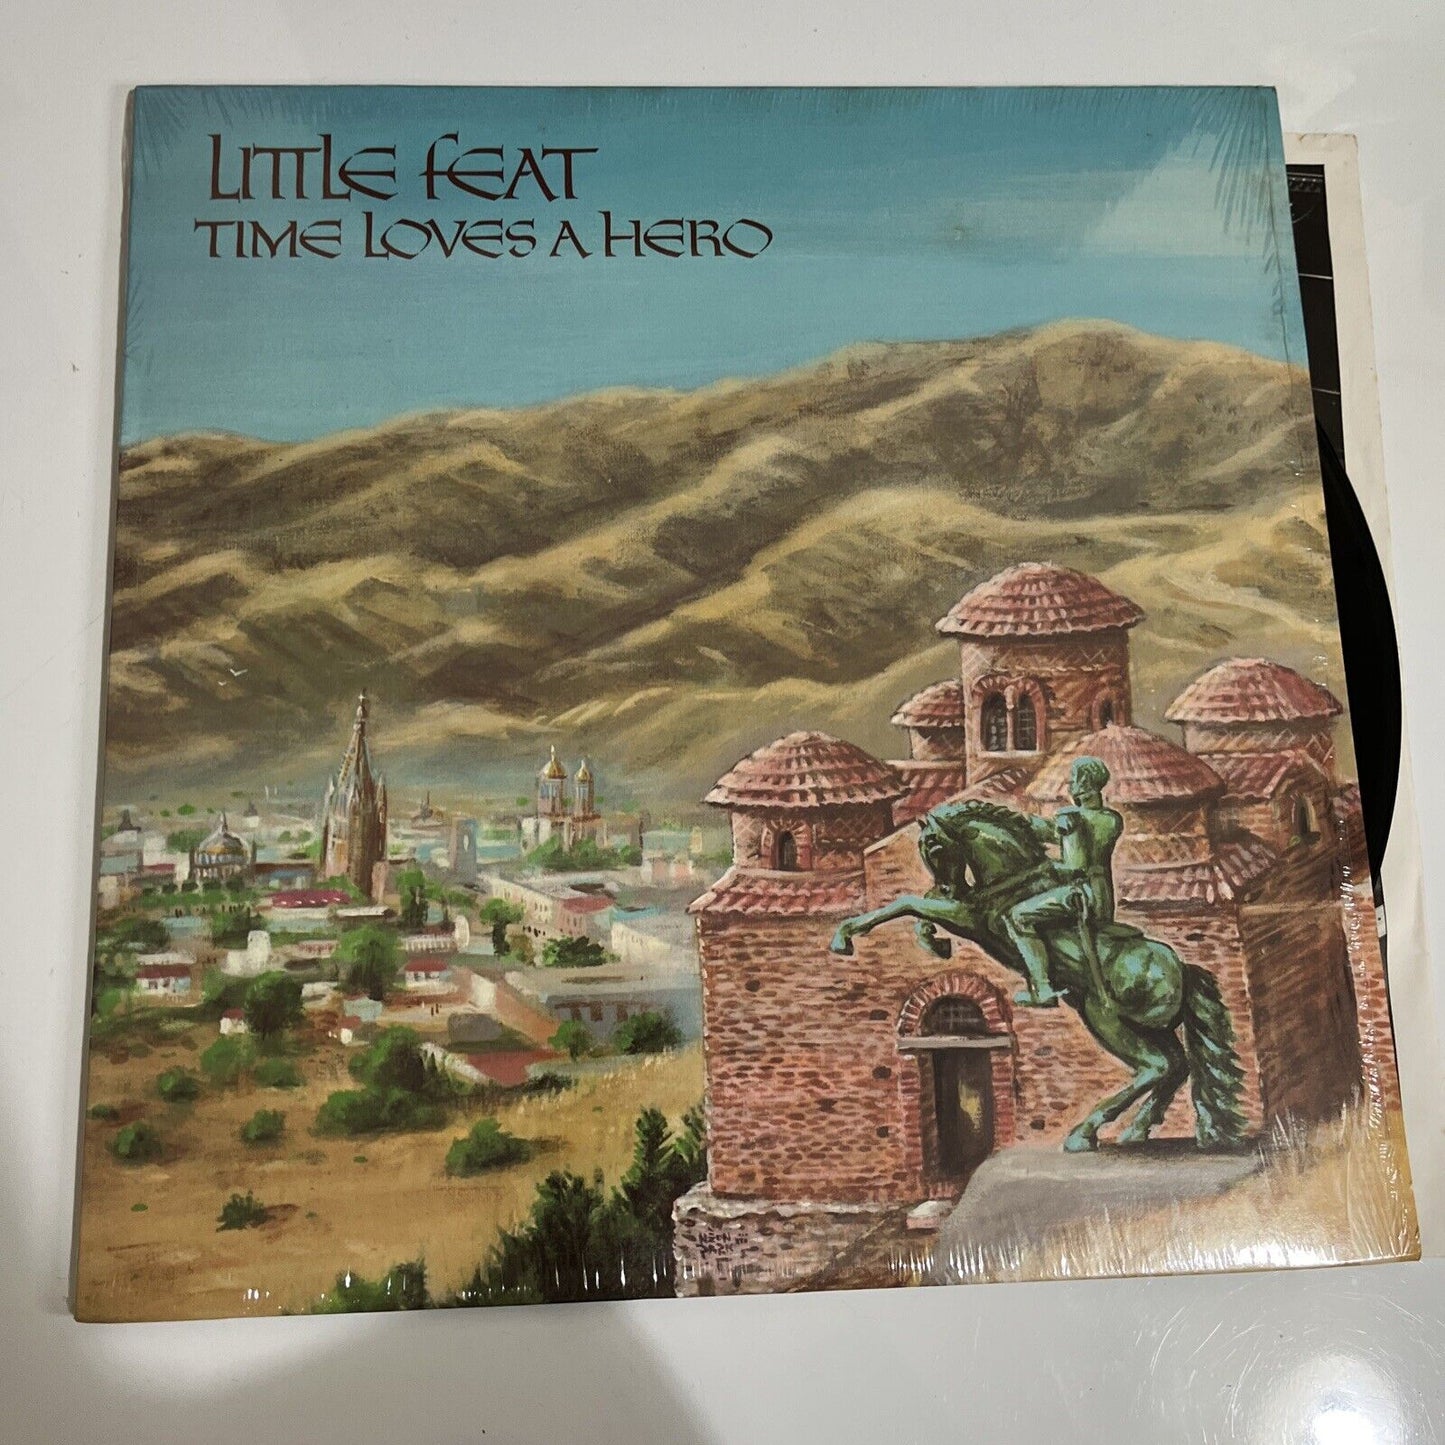 Little Feat – Time Loves A Hero 1977 LP Vinyl Record BS 3015